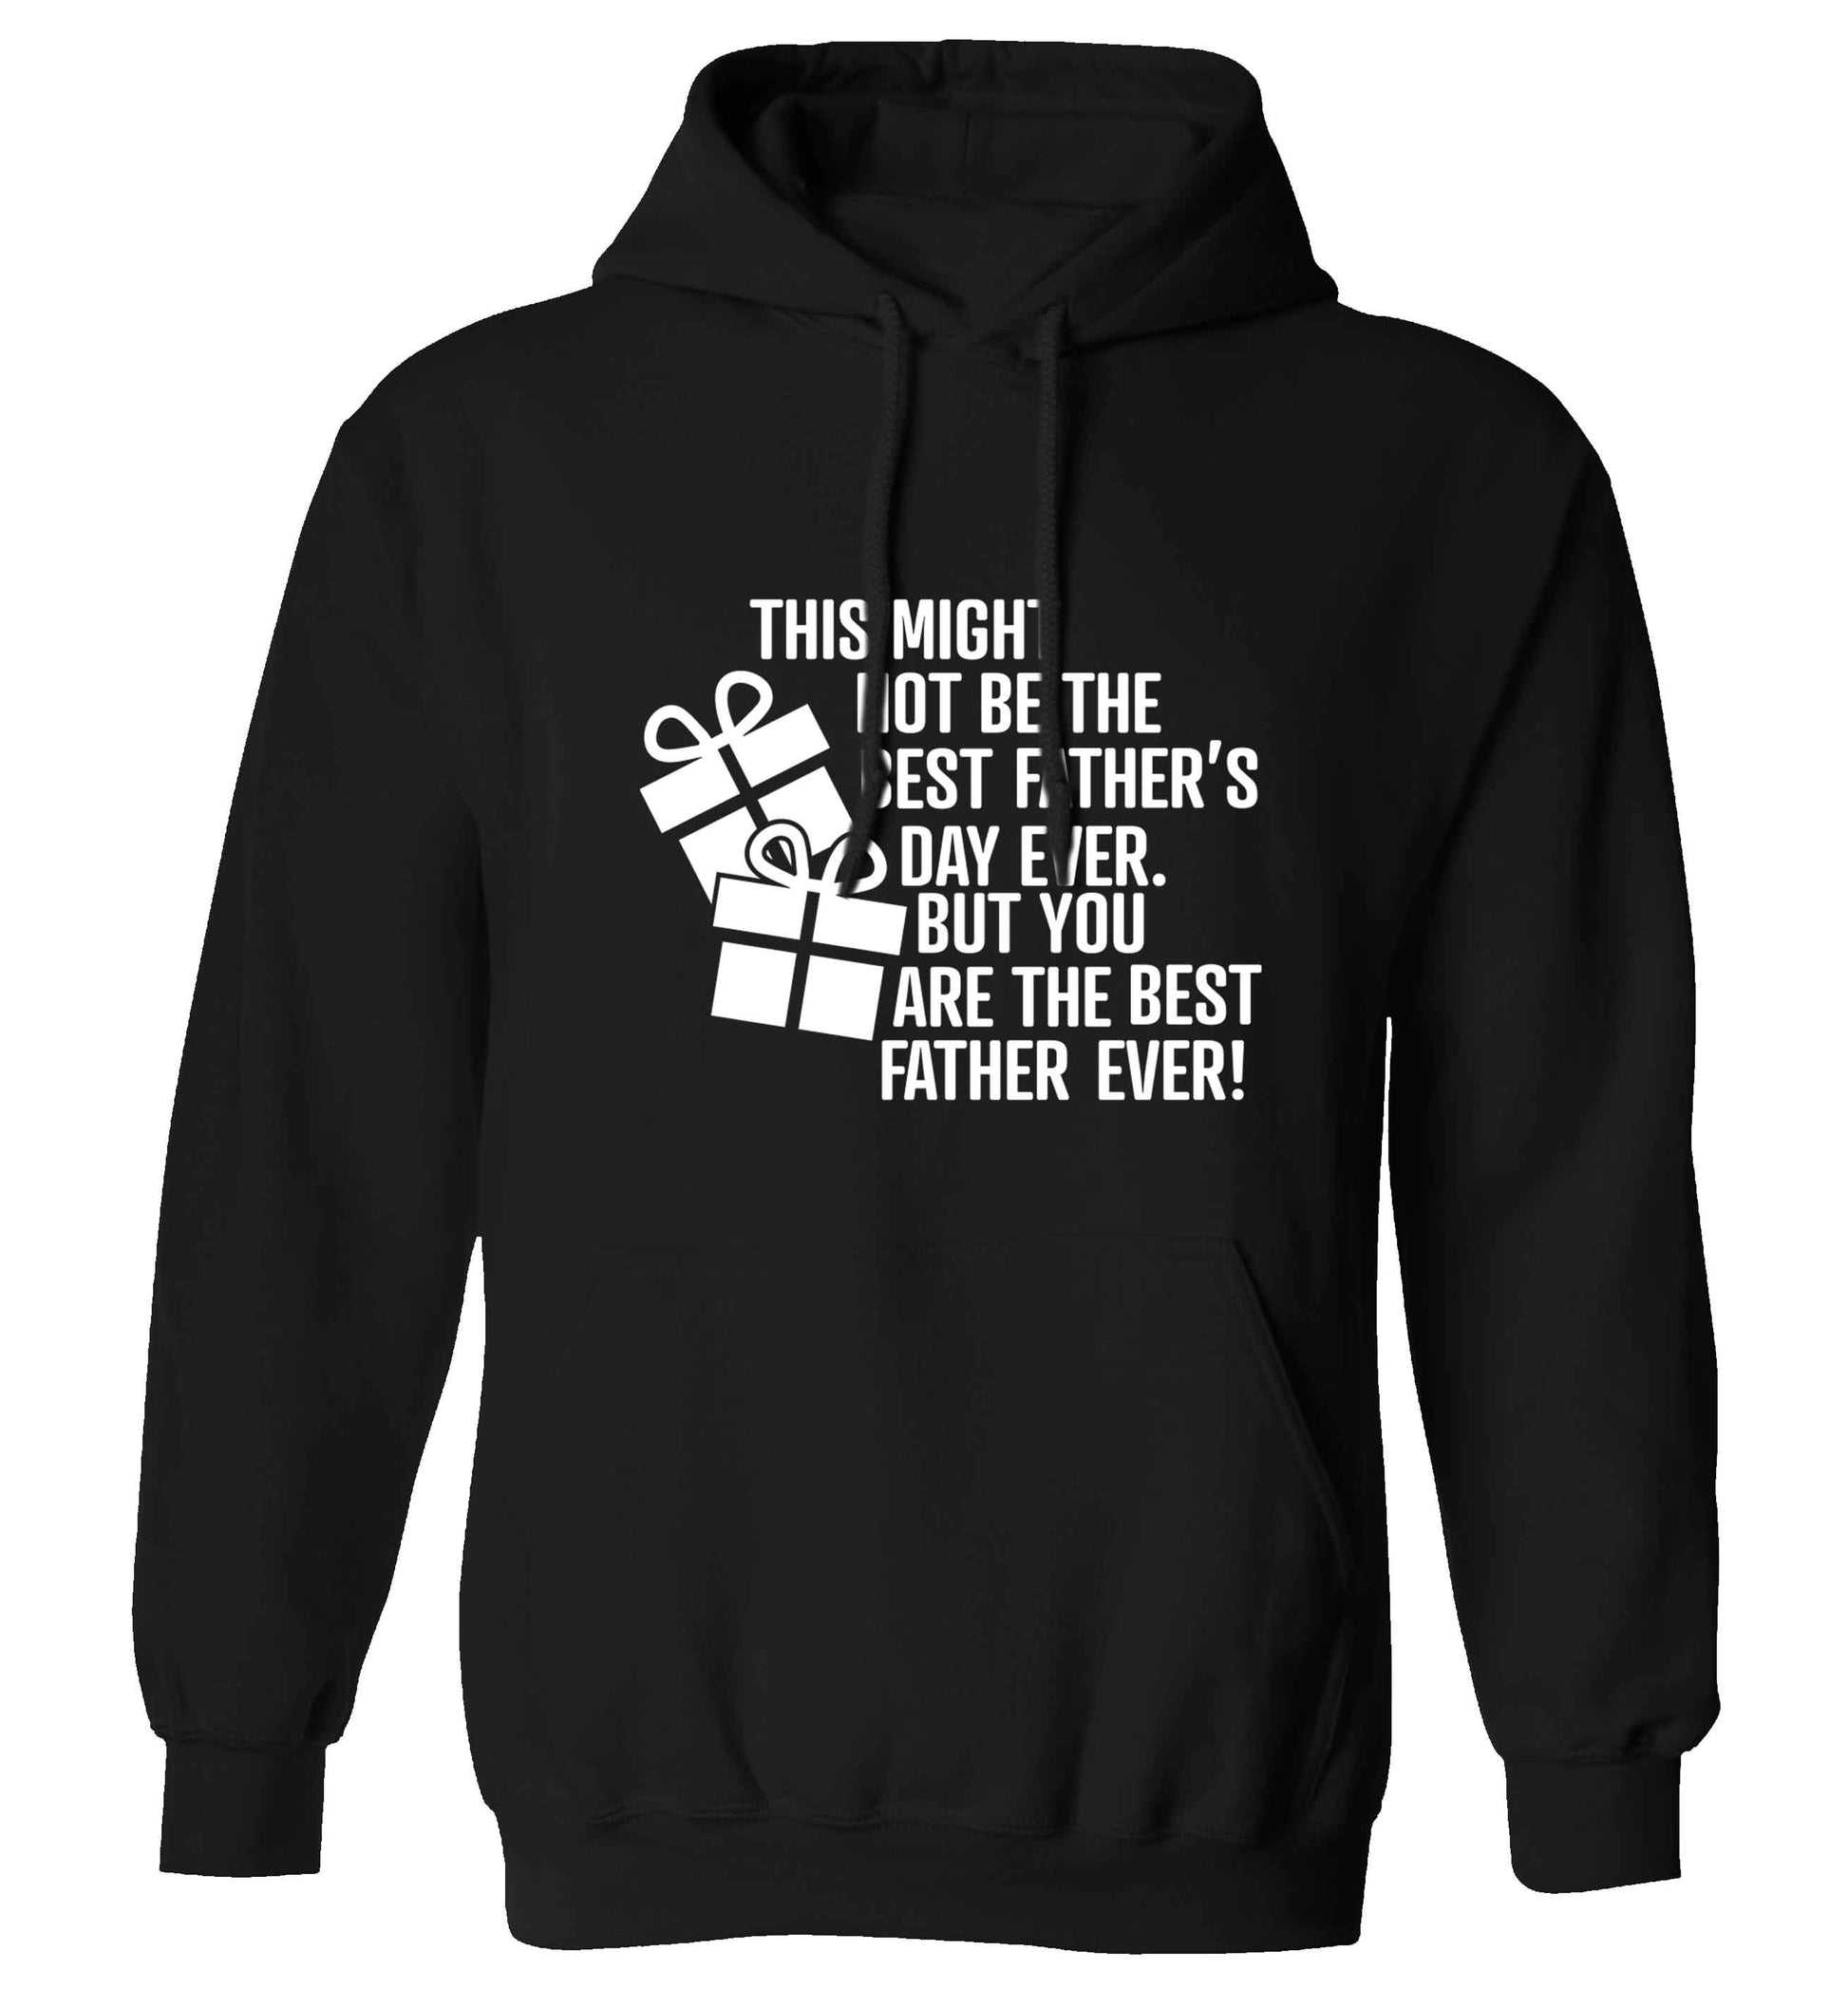 It might not be the best Father's Day ever but you are the best father ever! adults unisex black hoodie 2XL